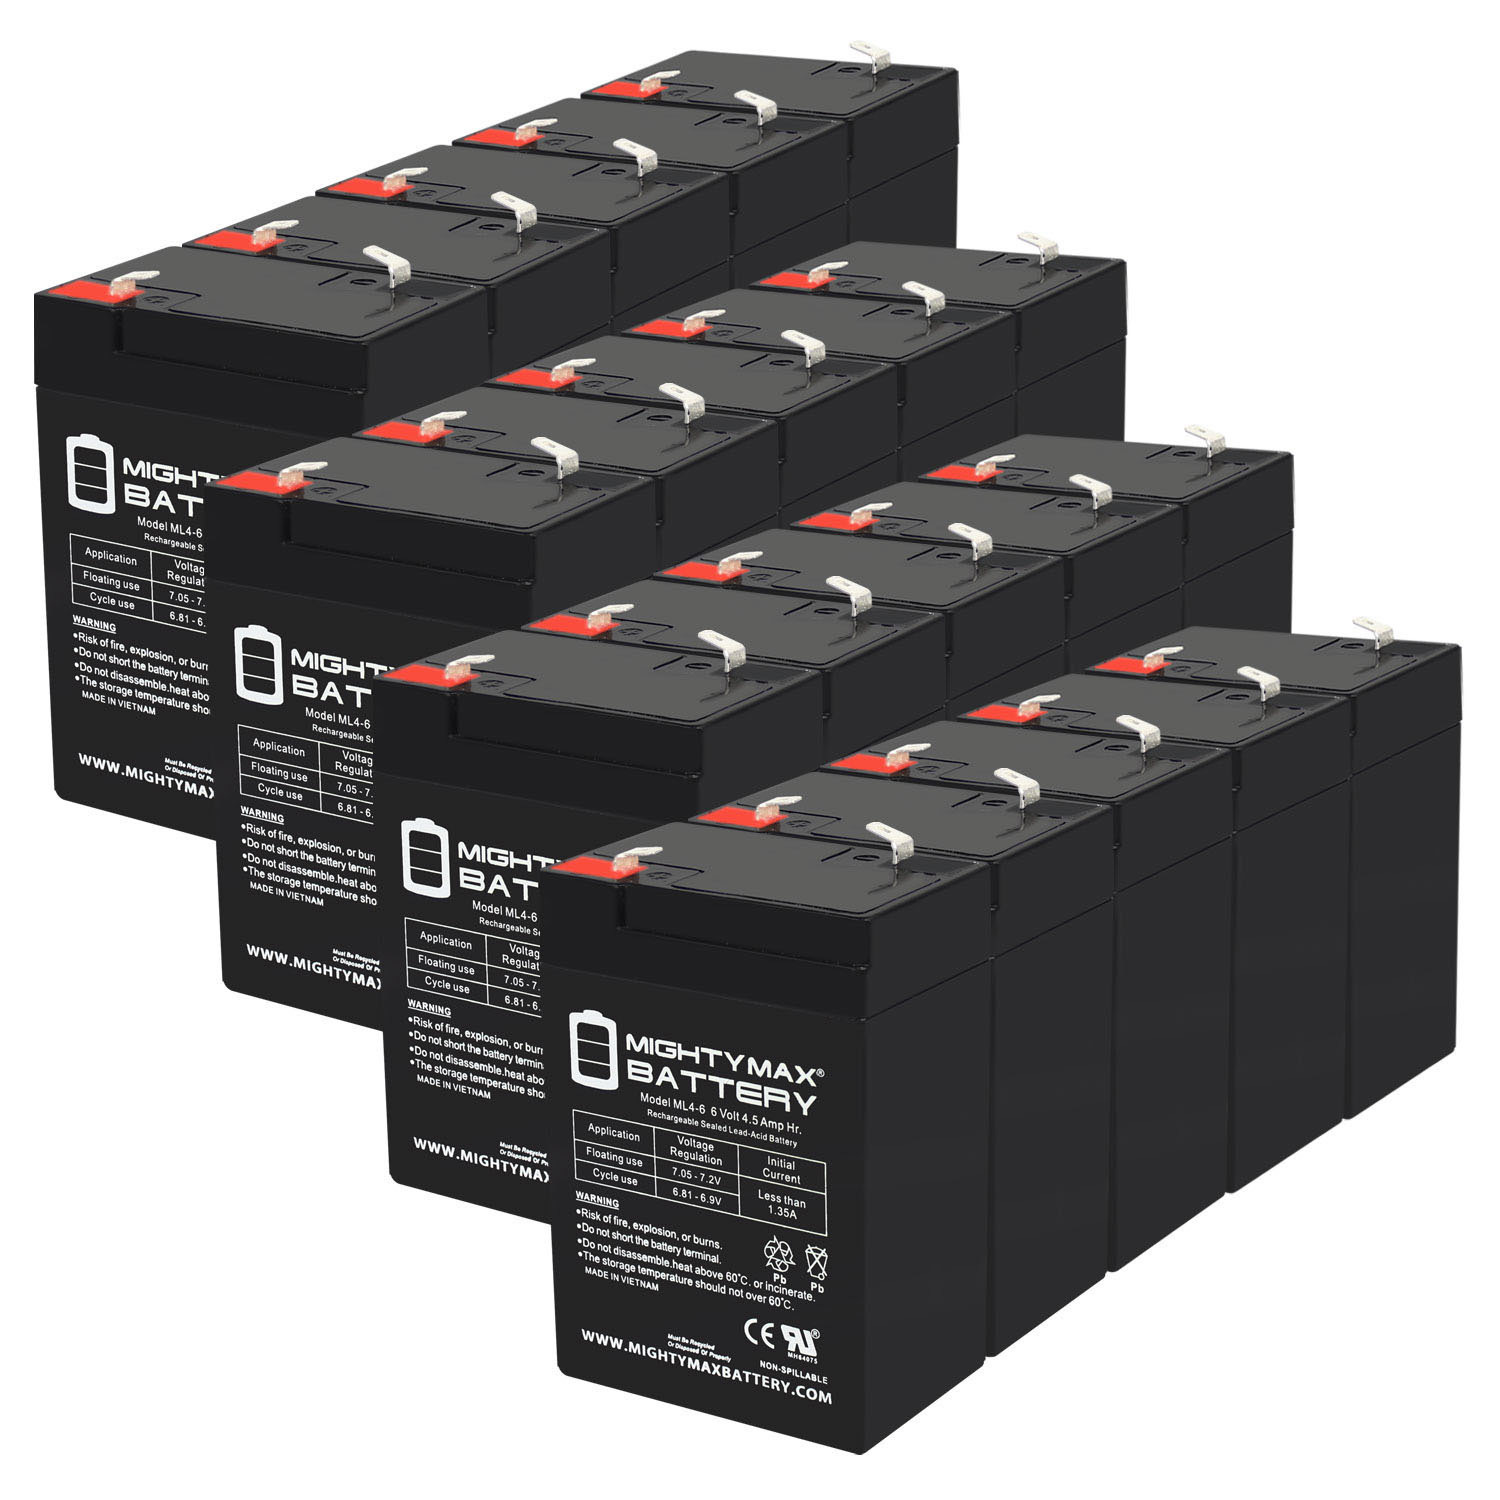 6V 4.5AH SLA Replacement Battery for Astralite AGM EU-HD-12 - 20 Pack